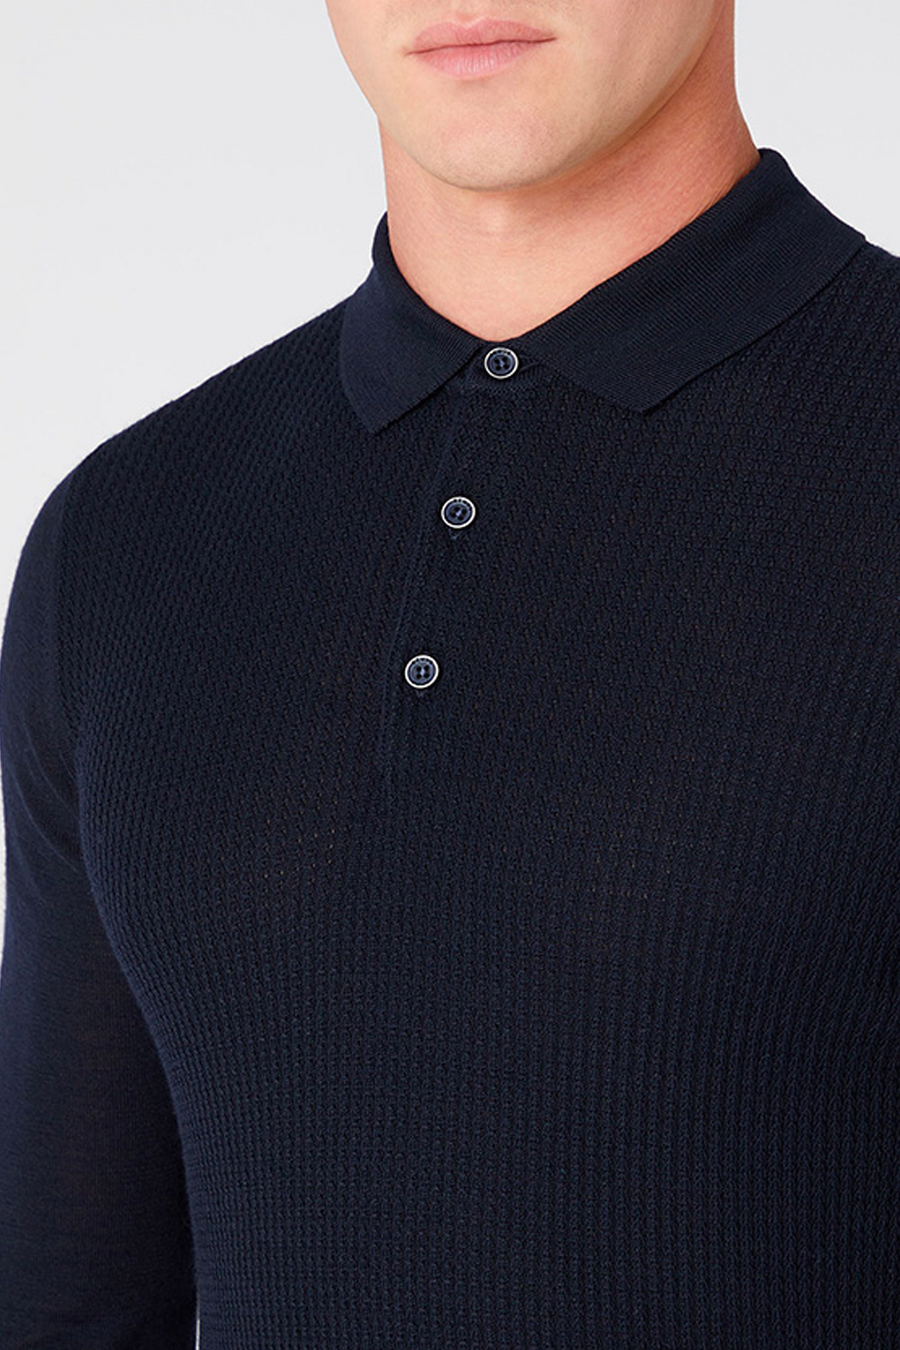 Buy the Remus Uomo Merino Wool-Blend L/S Knitted Polo Navy at Intro. Spend £50 for free UK delivery. Official stockists. We ship worldwide.